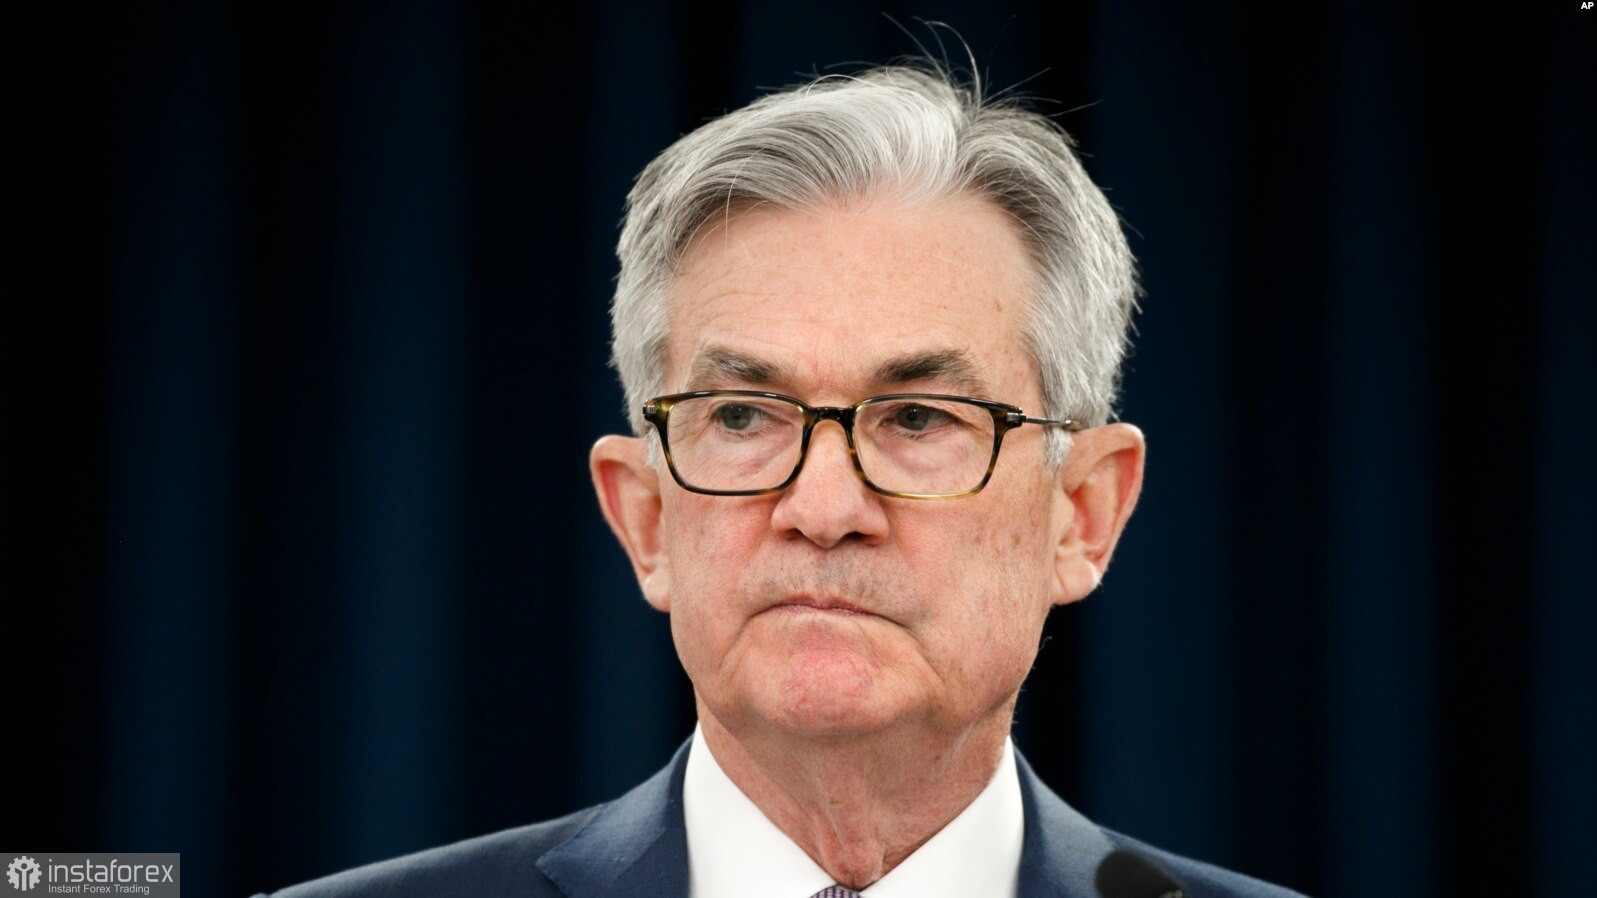 Jerome Powell did not change his rhetoric at a speech to Congress.